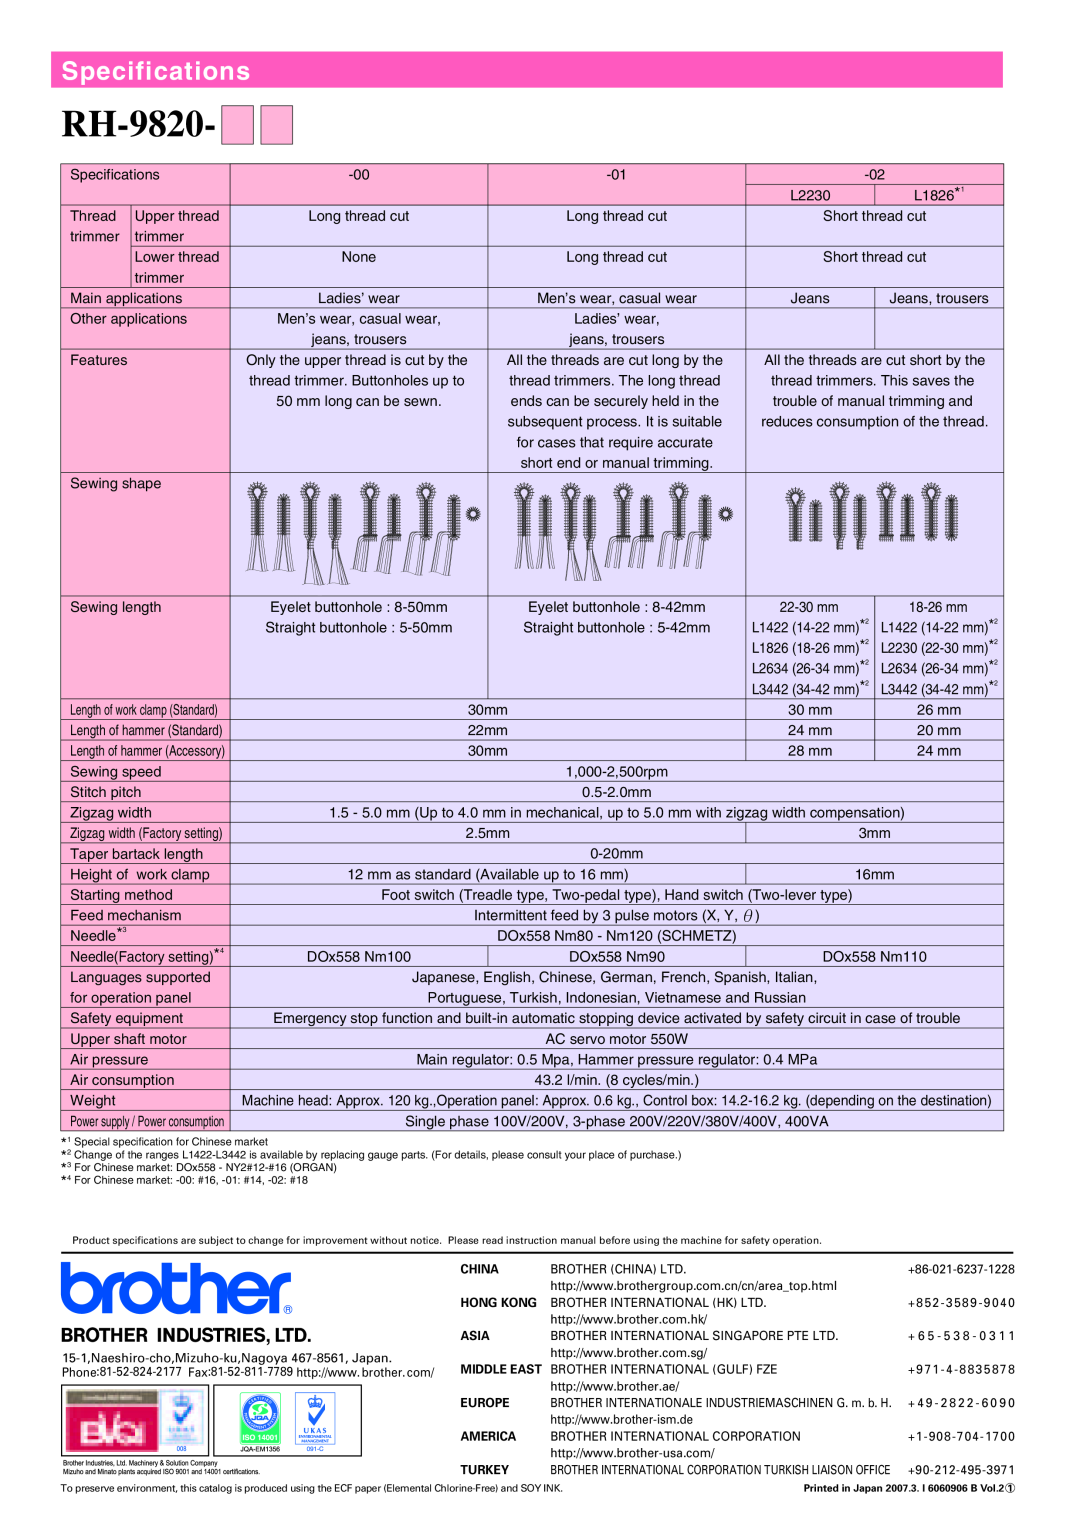 Brother RH-9820 manual Specifications 